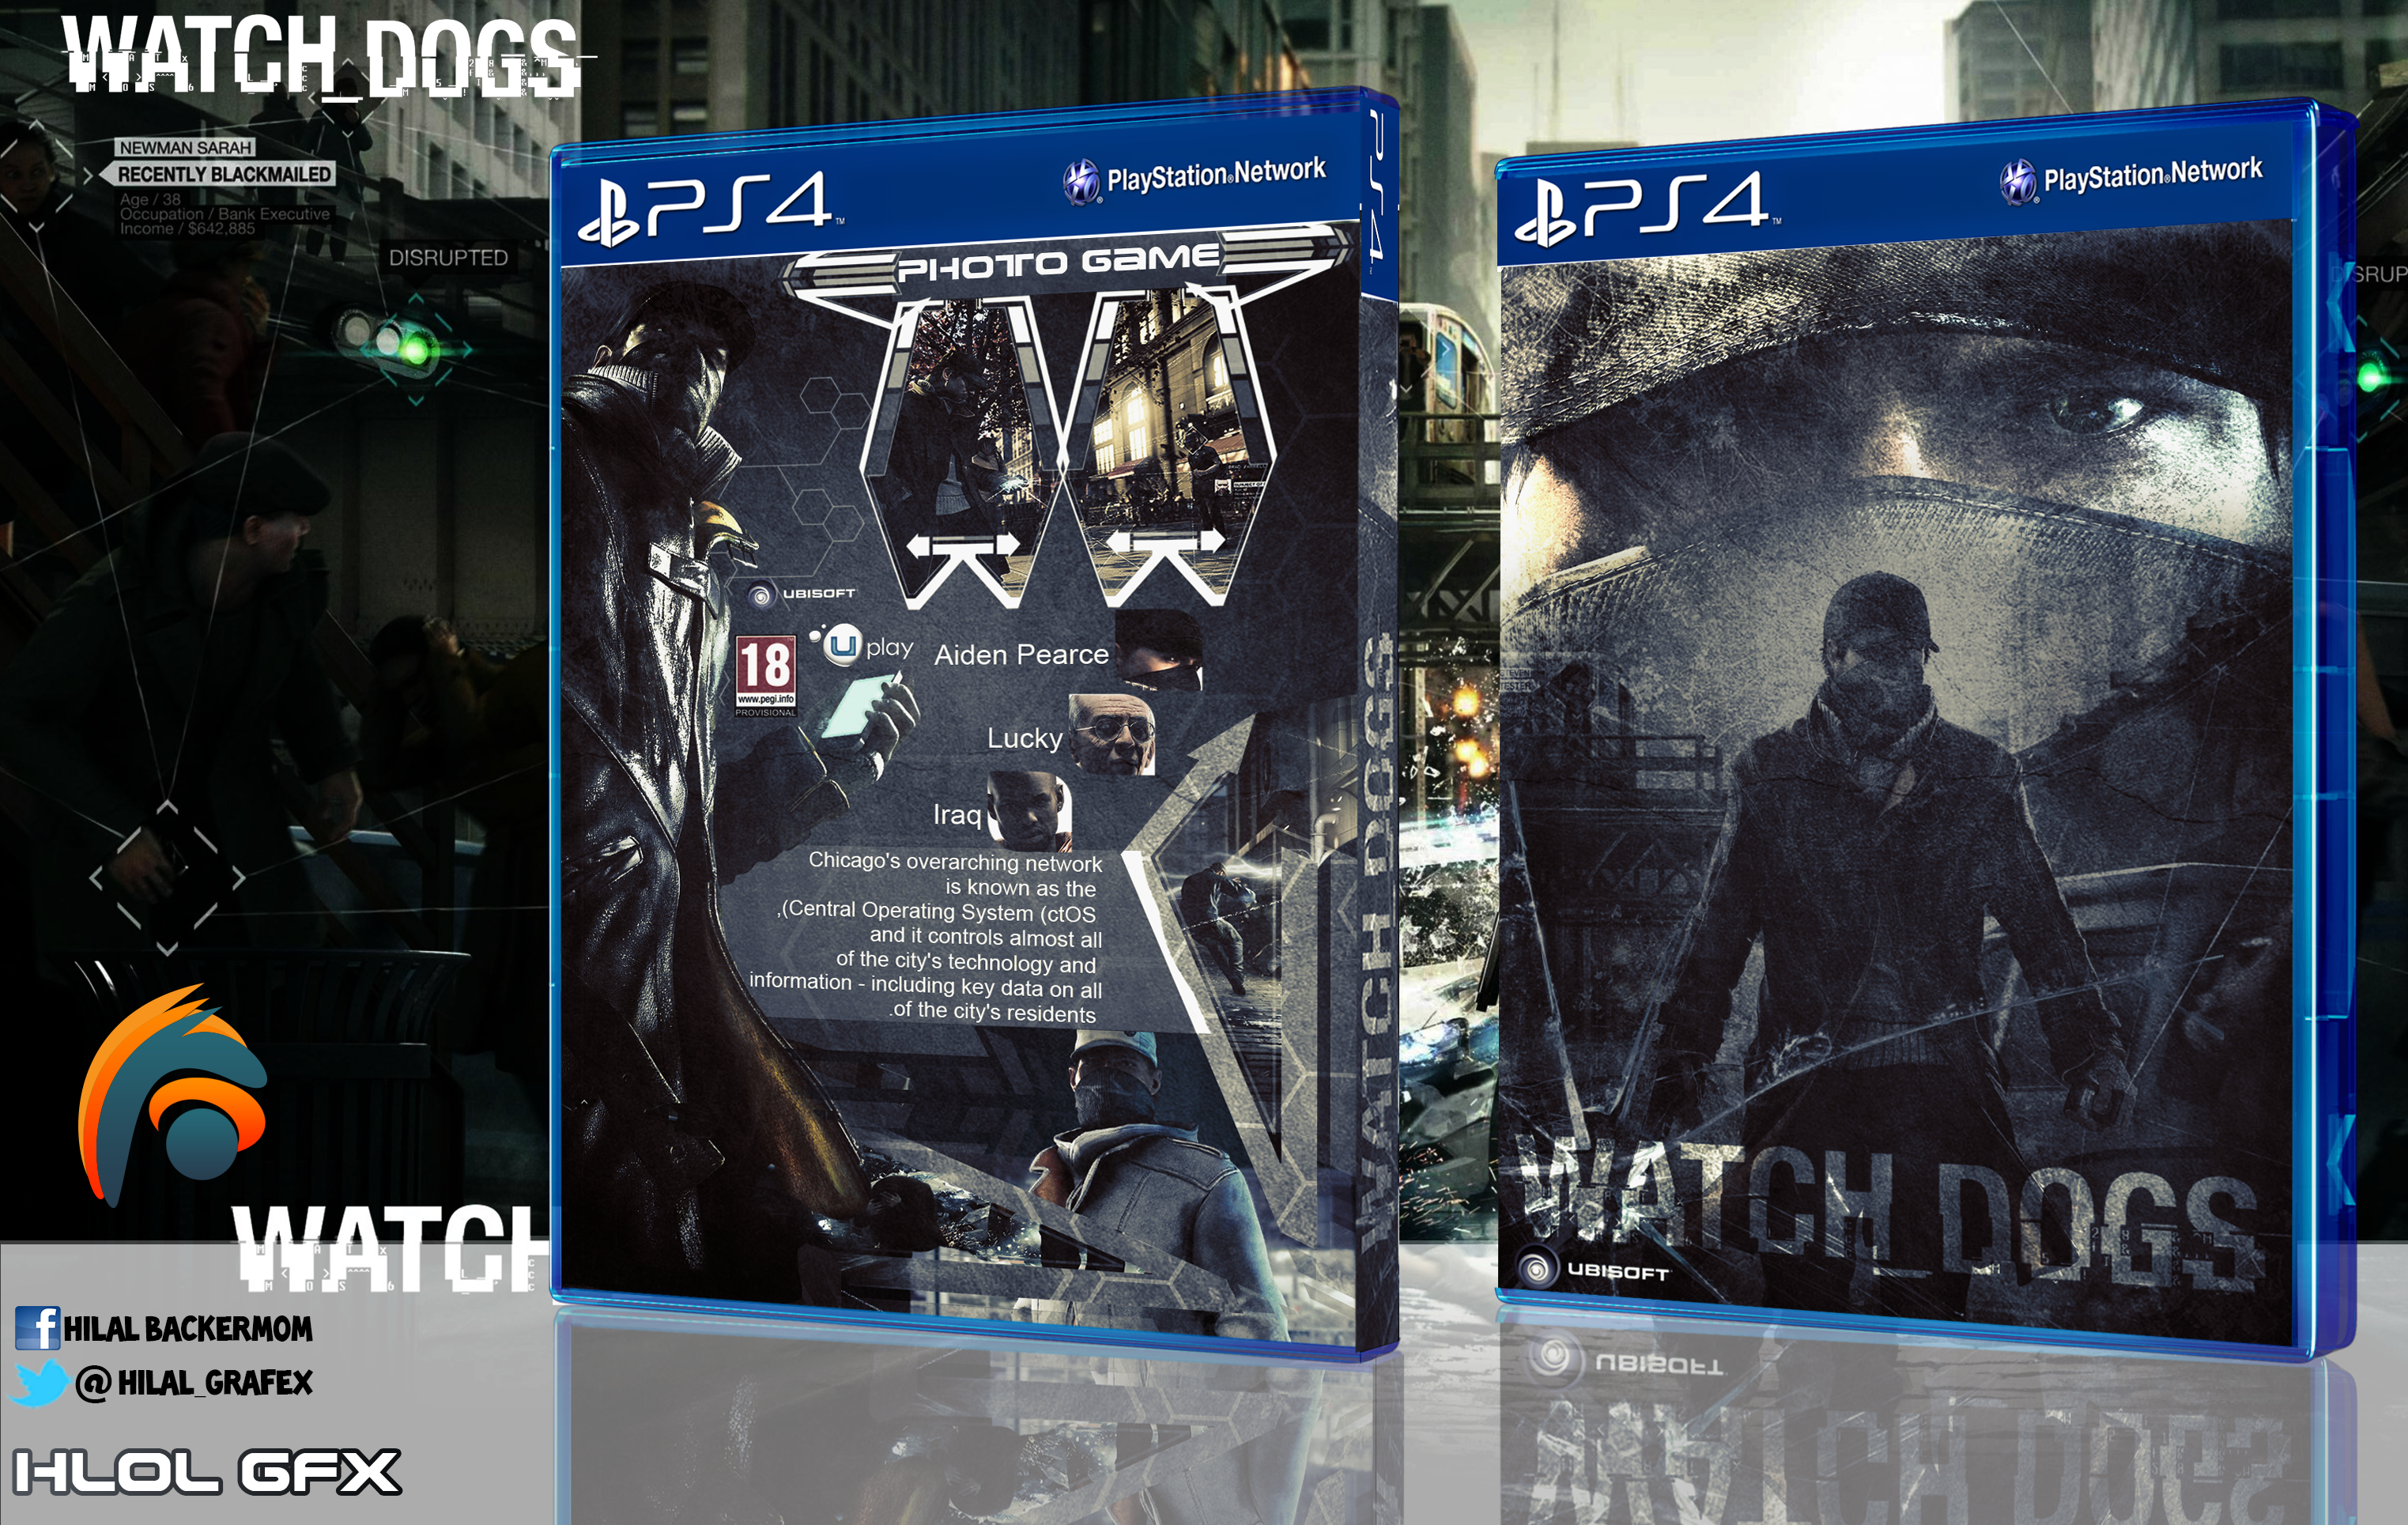 WATCH DOGS box cover